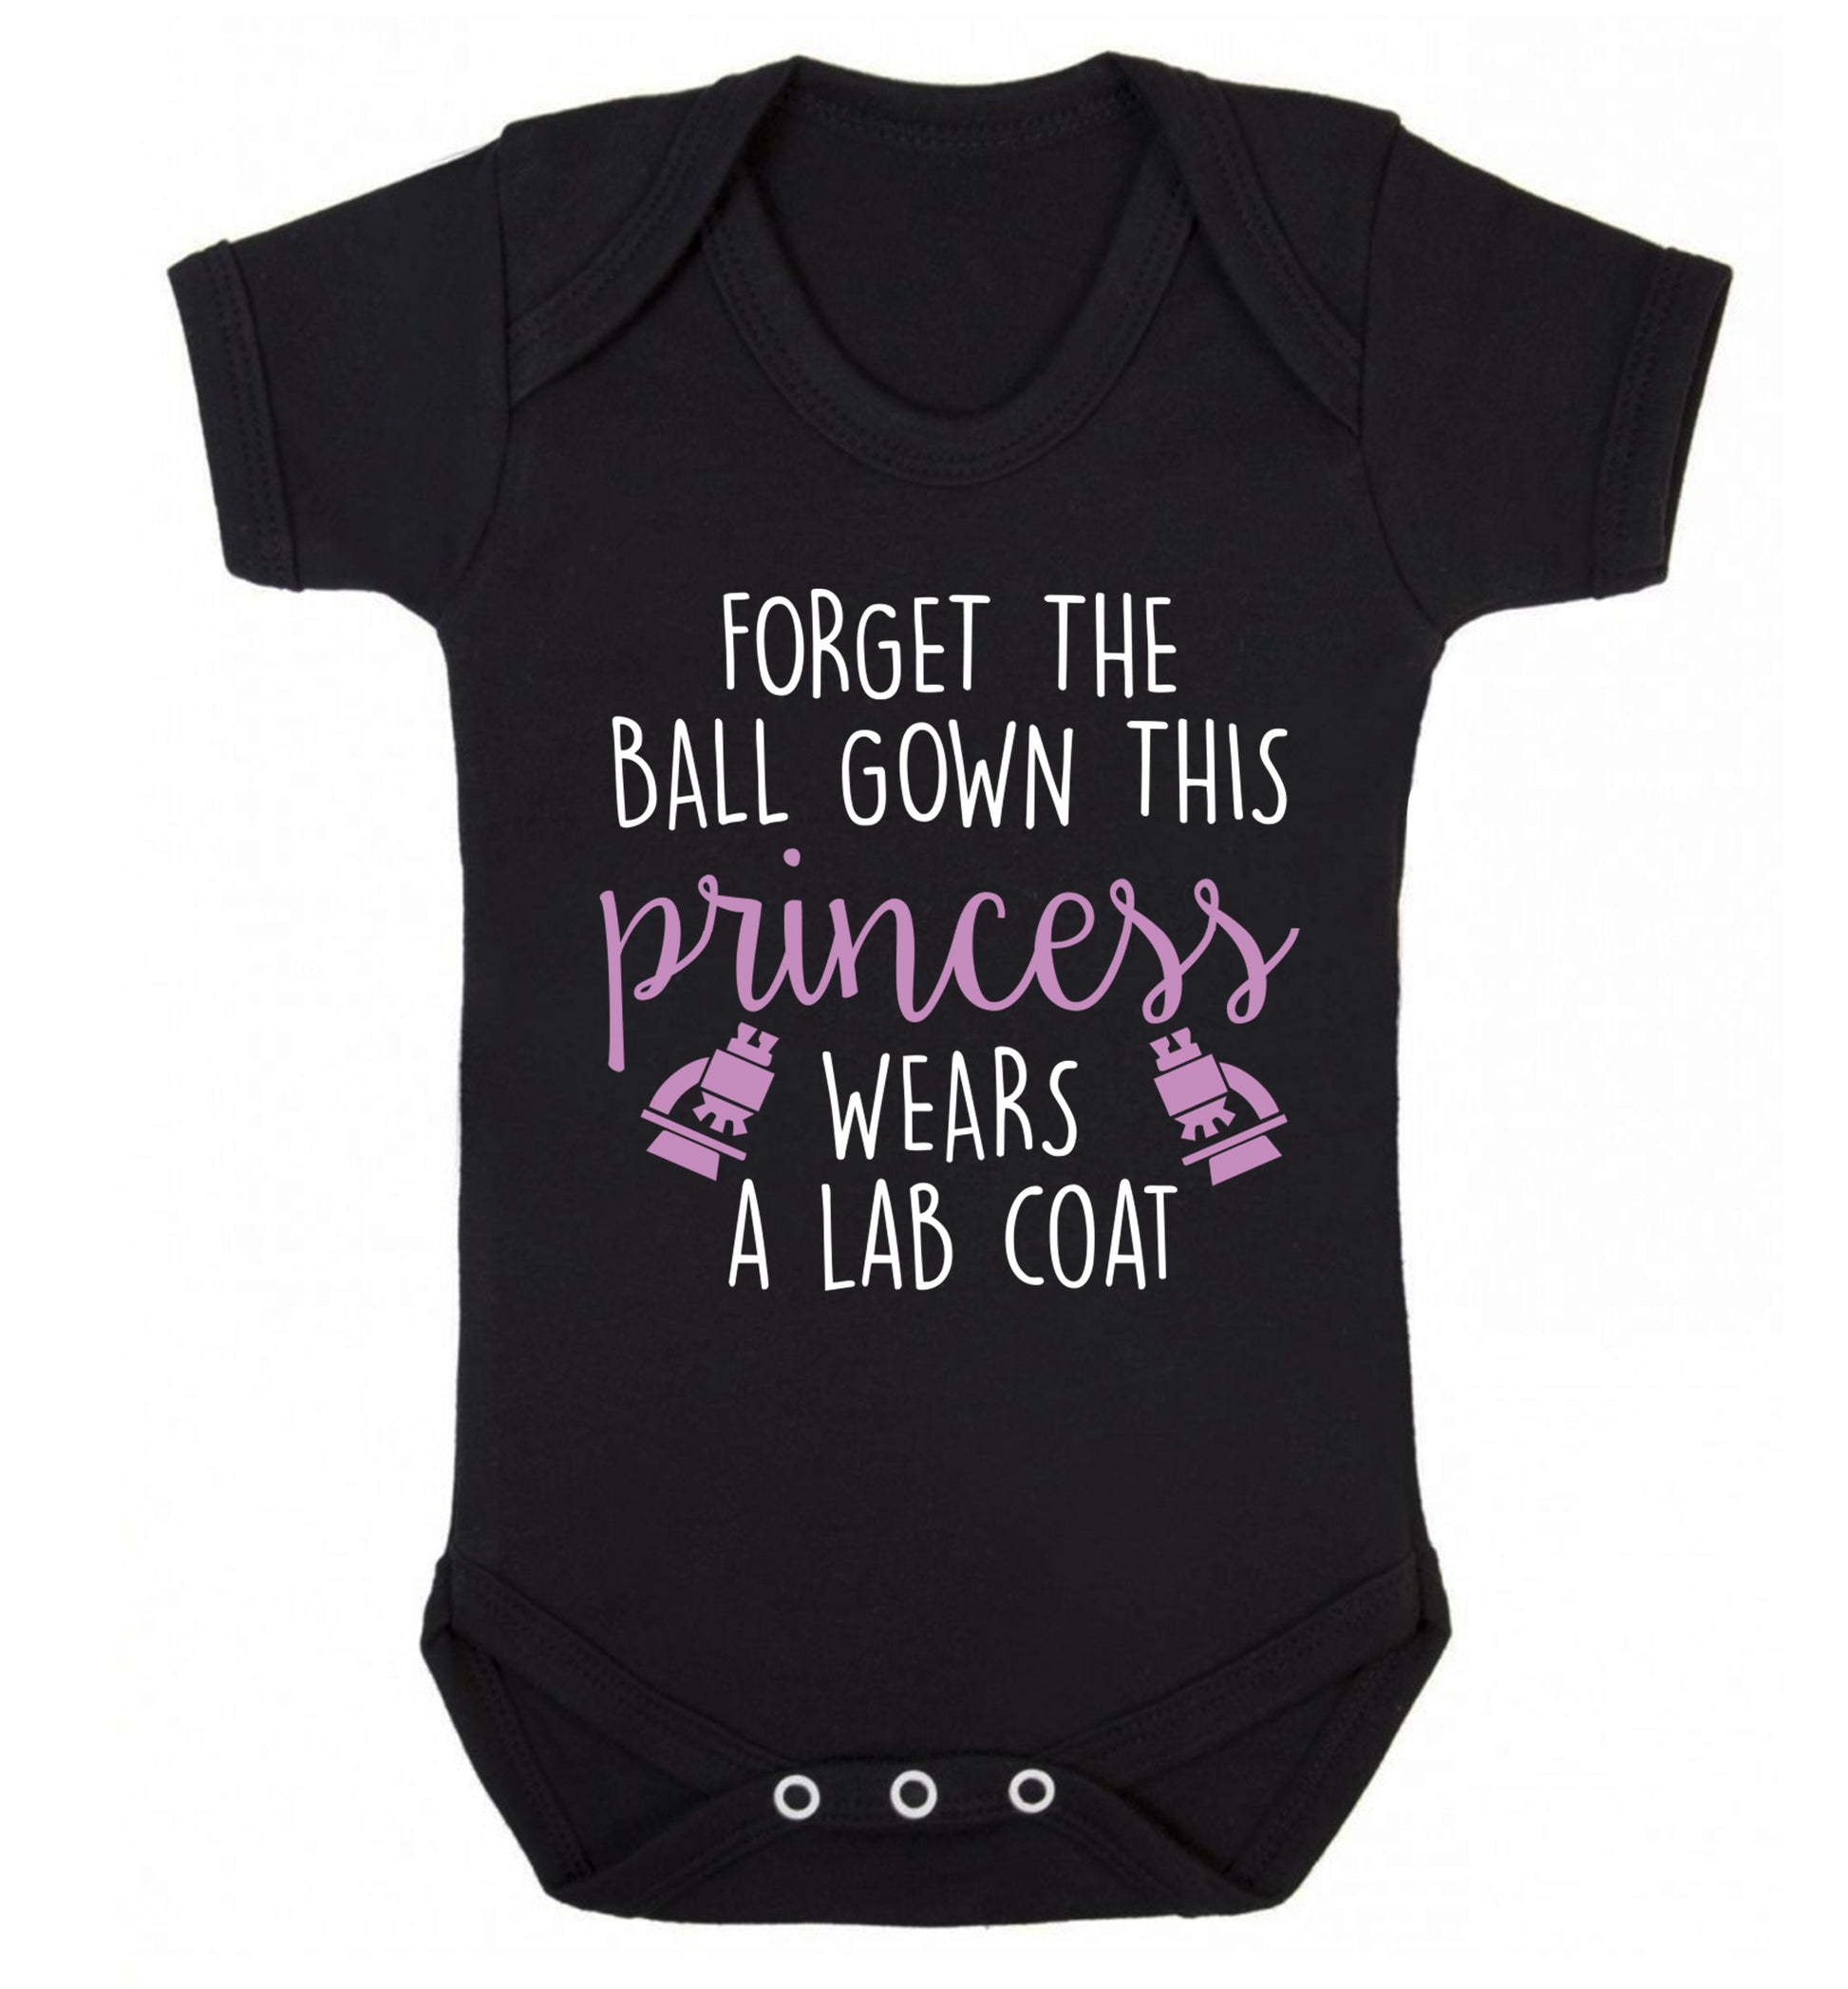 Forget the ball gown this princess wears a lab coat Baby Vest black 18-24 months